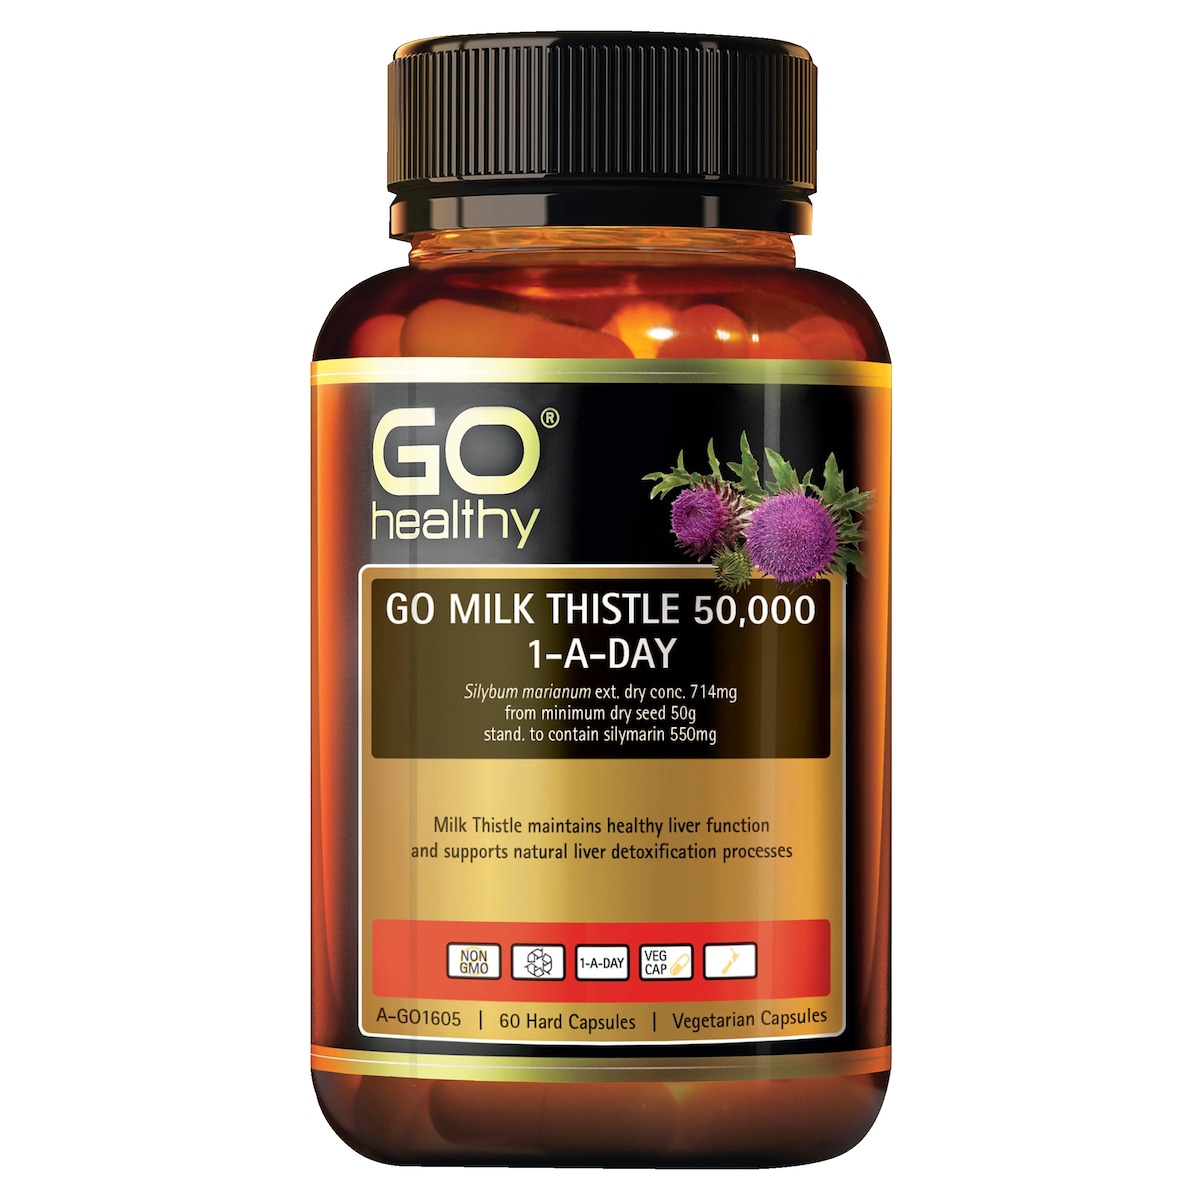 GO Healthy Milk Thistle 50000 1-A-Day 60 Vege Capsules